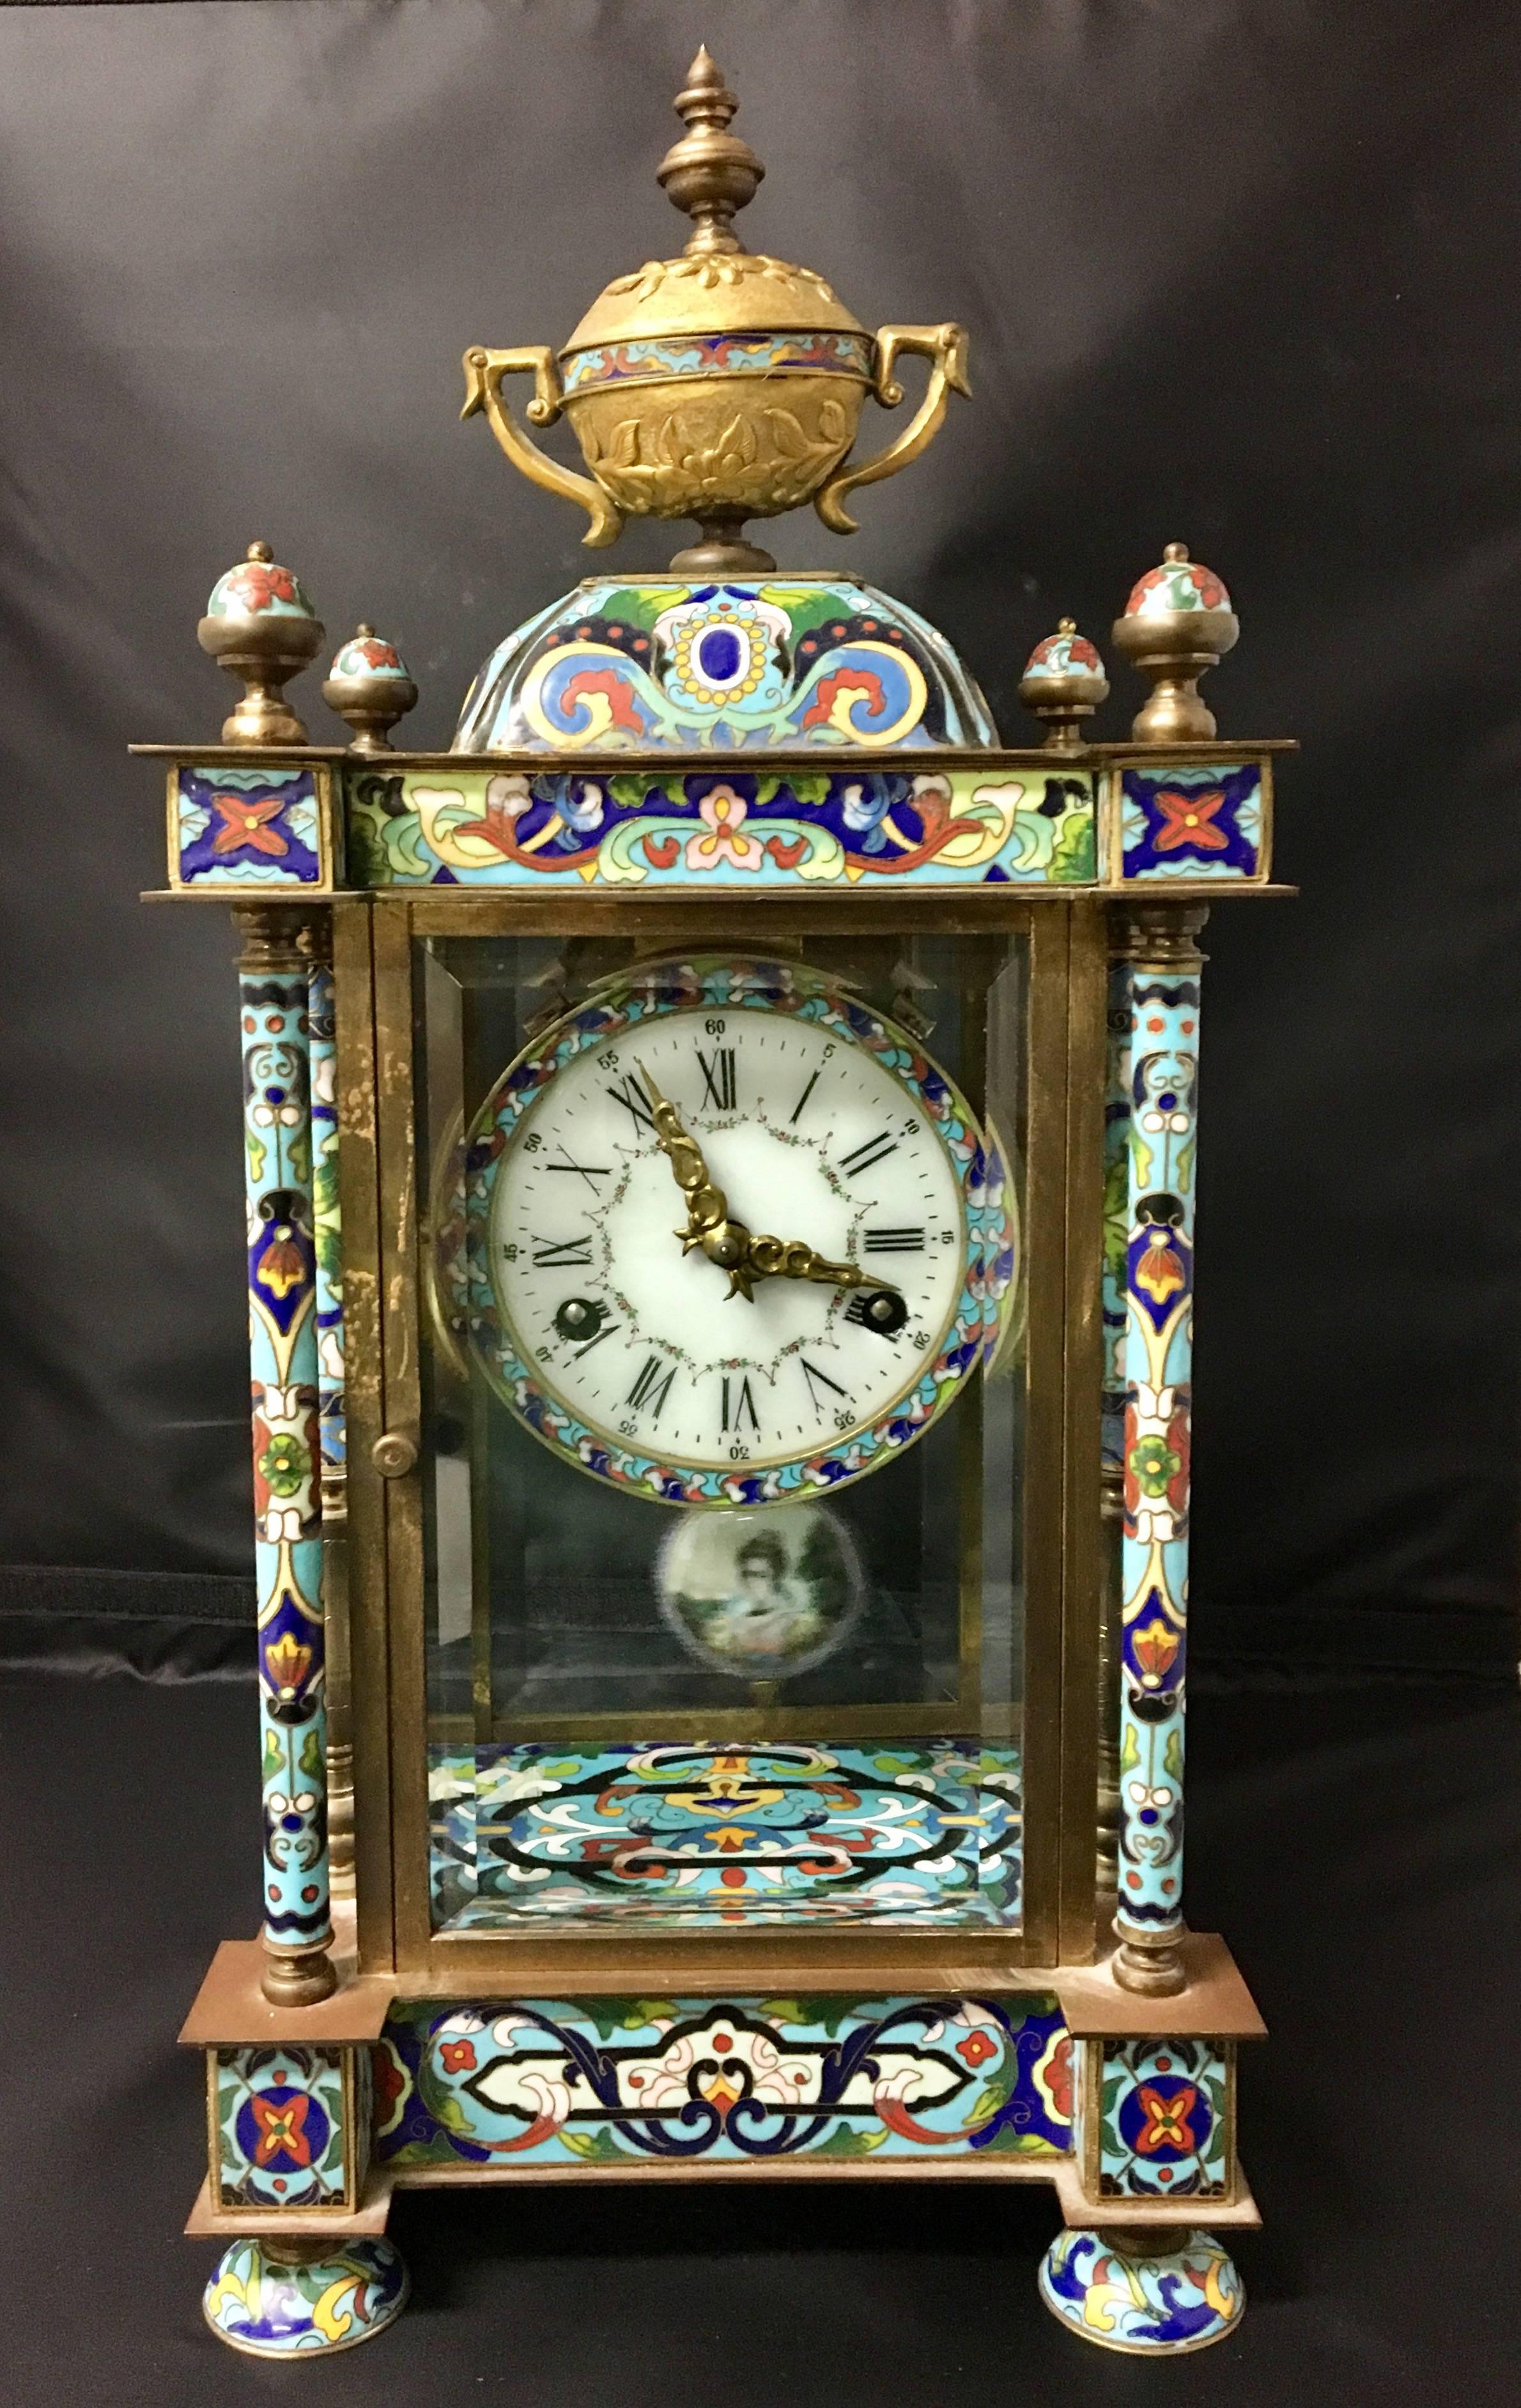 Massive Chinese style cloisonne or brass mantel clock enclosed in a four-sided beveled glass casing. Cameo face embedded in pendulum. Very nice working condition.